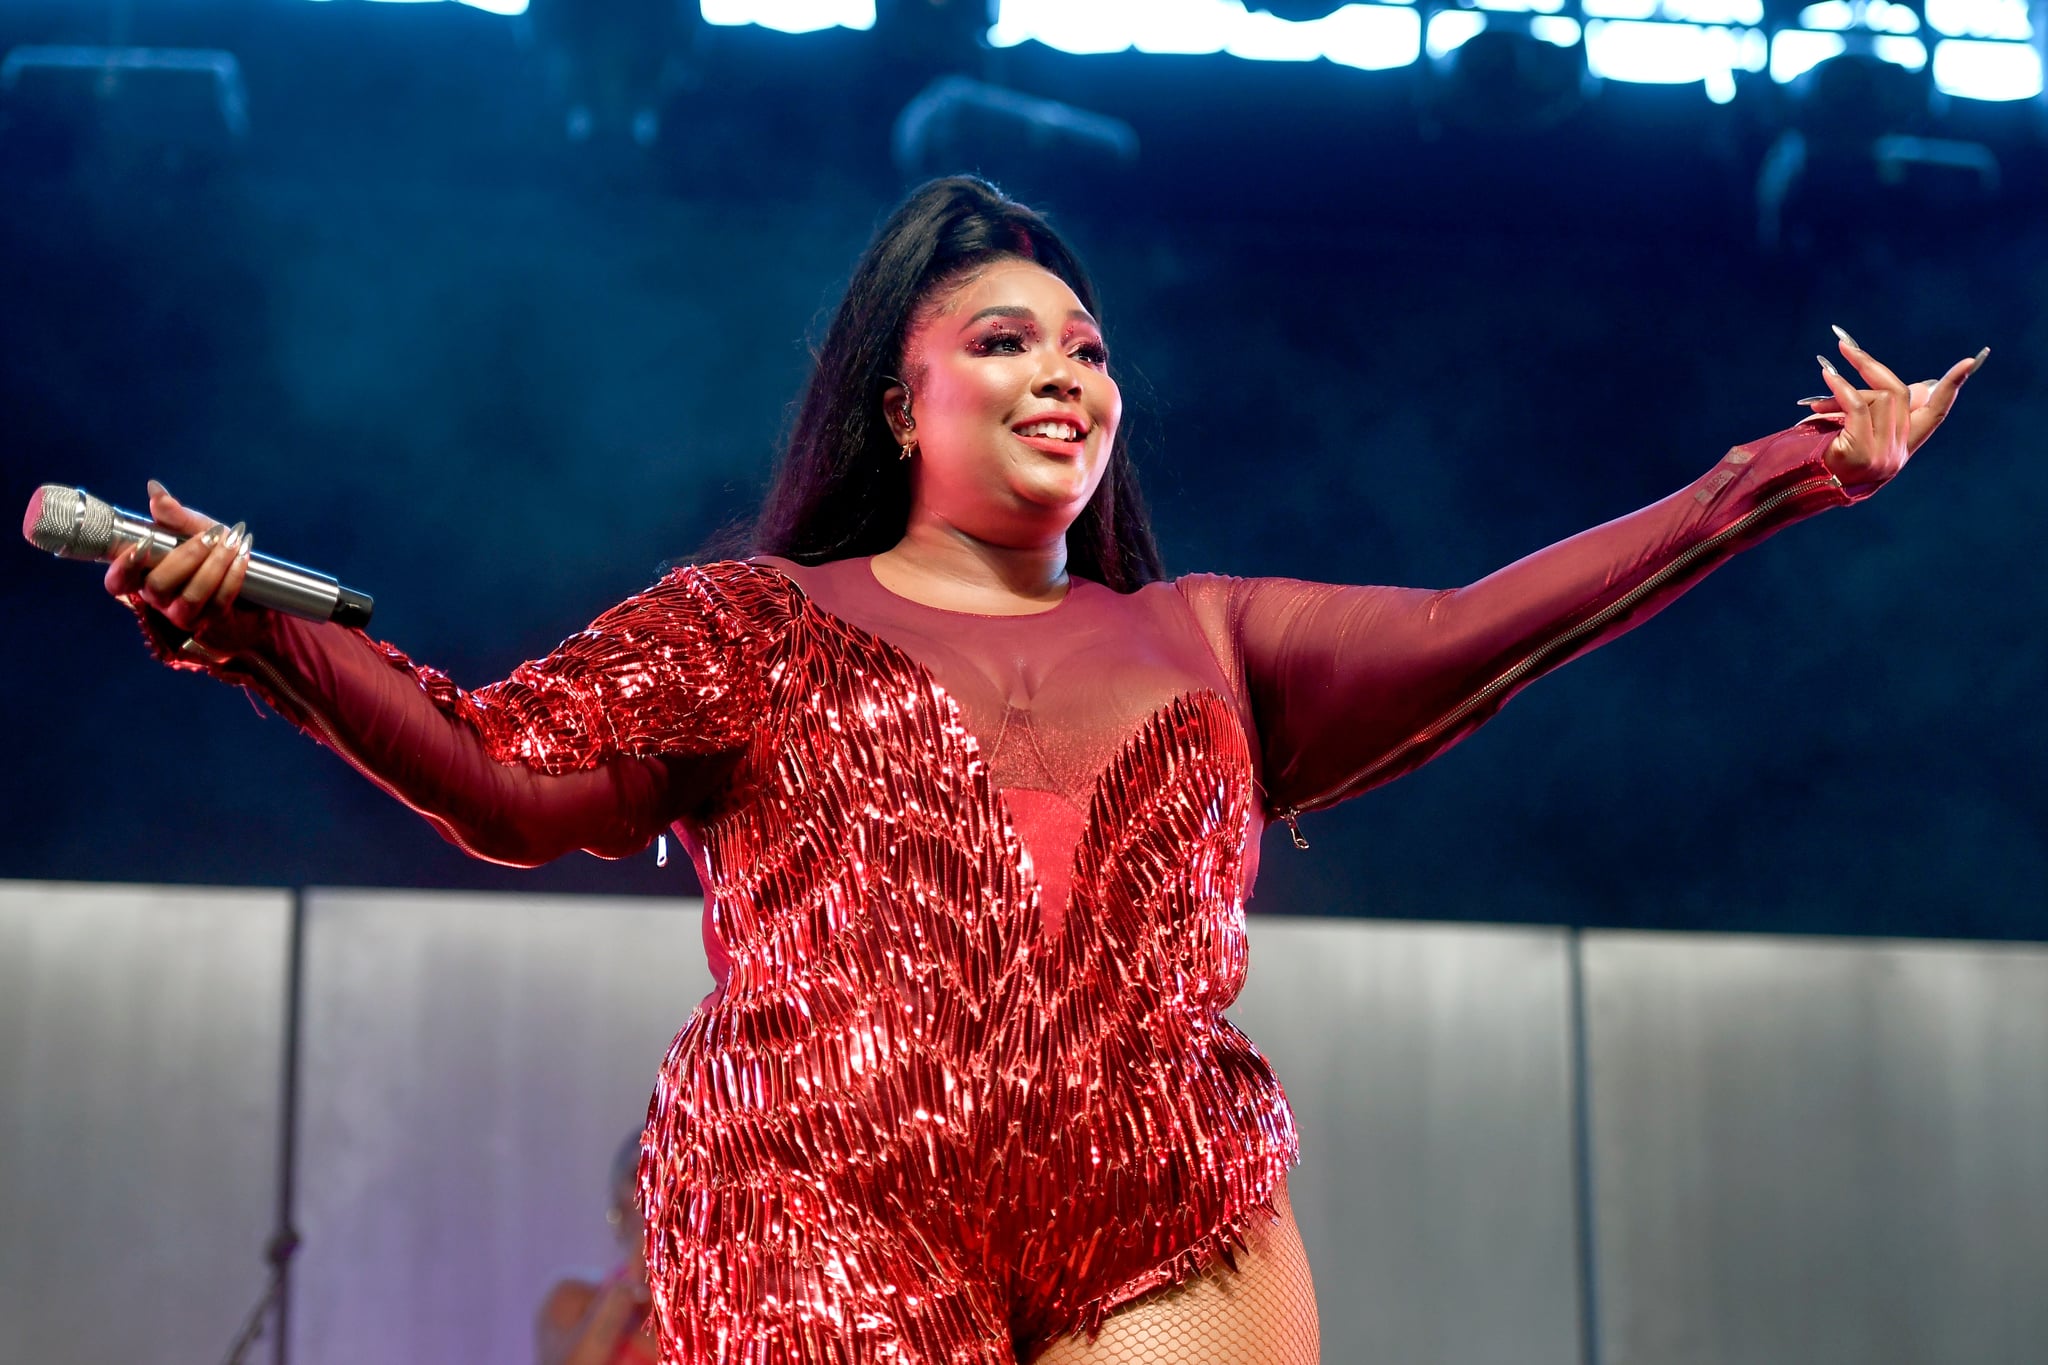 INDIO, CA - APRIL 21:  Lizzo performs at Mojave Tent during the 2019 Coachella Valley Music And Arts Festival on April 21, 2019 in Indio, California.  (Photo by Frazer Harrison/Getty Images for Coachella)